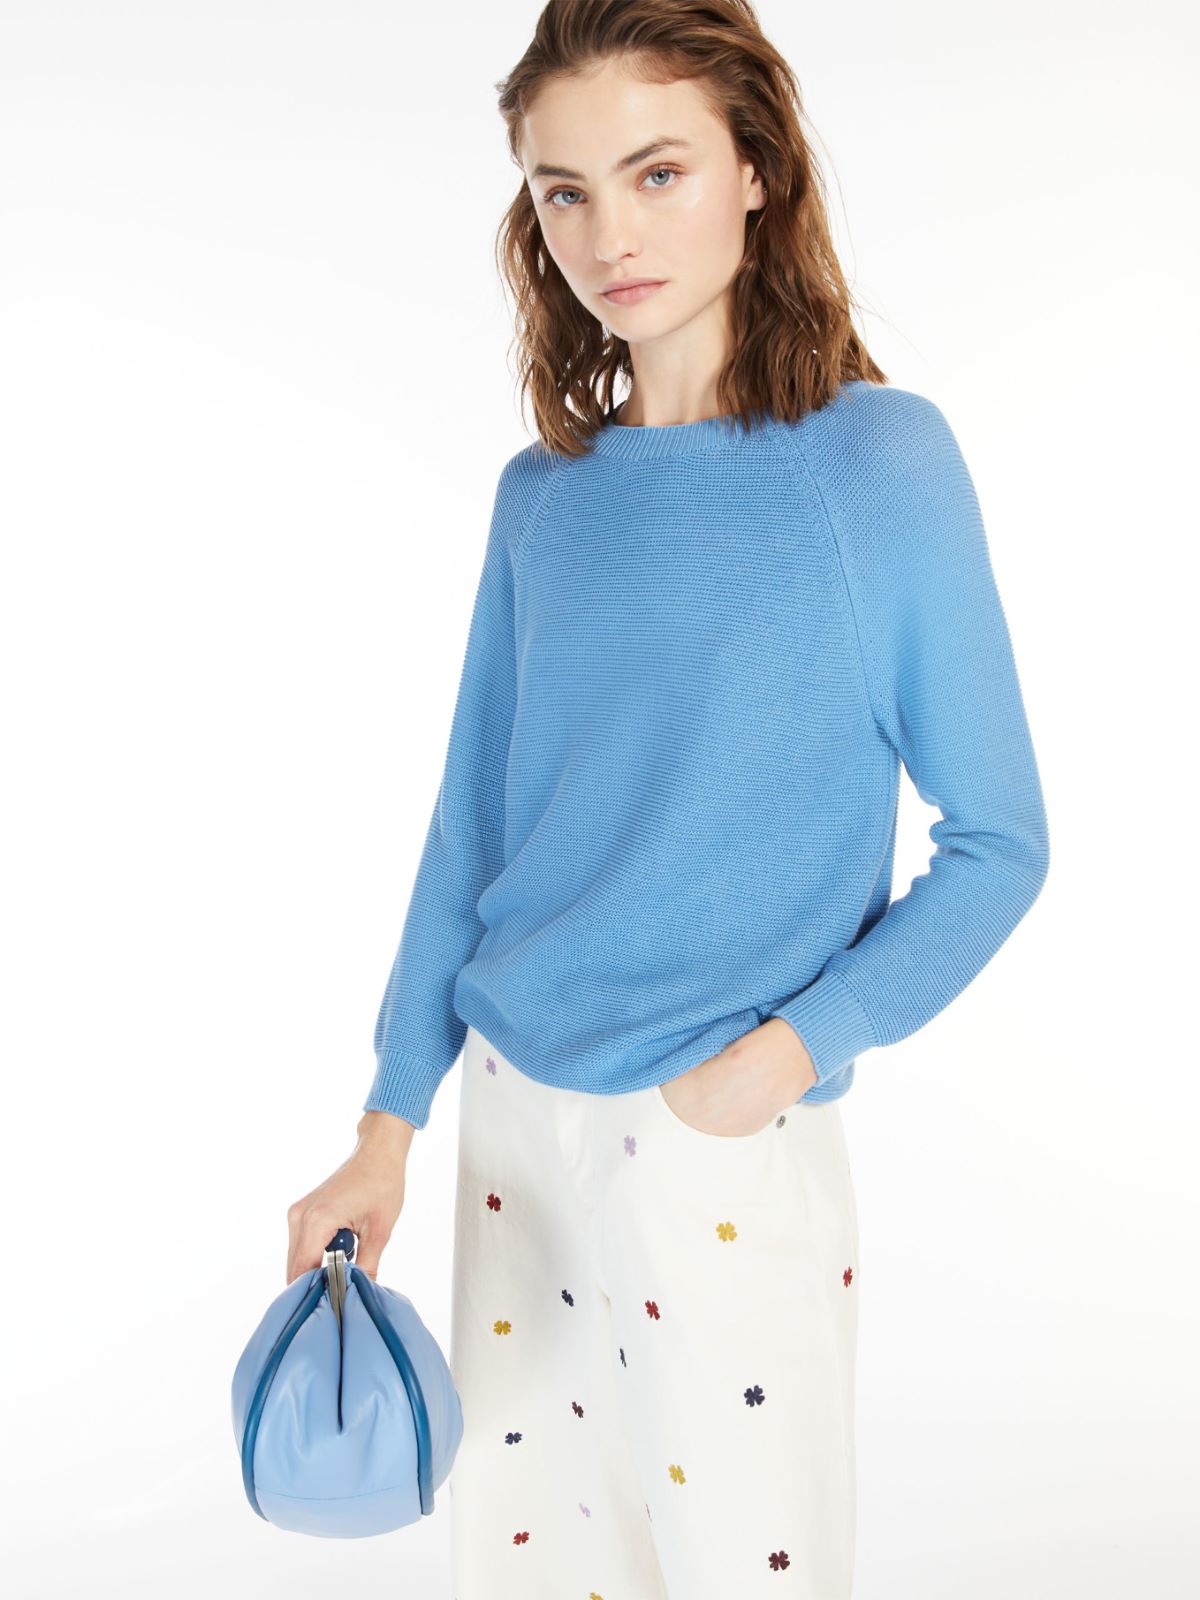 Relaxed-fit cotton sweater - SKY BLUE - Weekend Max Mara - 4